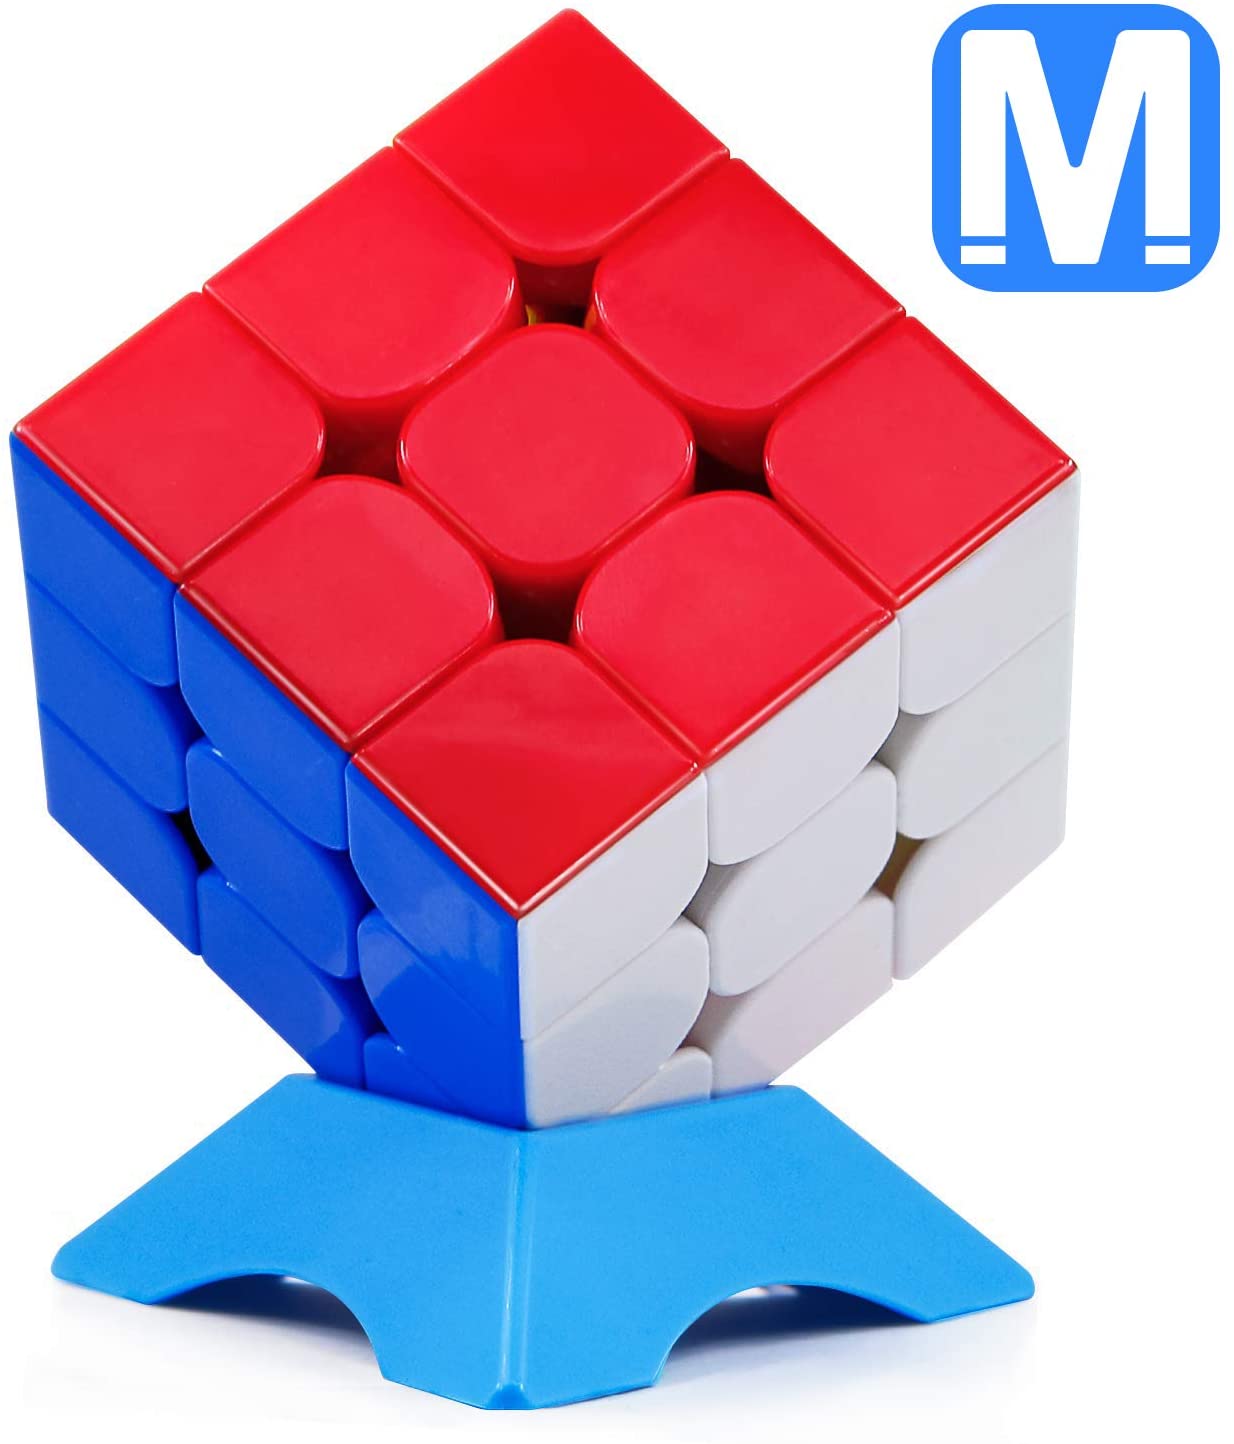 FAVNIC Magic Cube Stickerless Speed Cube Smooth Magic Cube Puzzle 3x3x3 